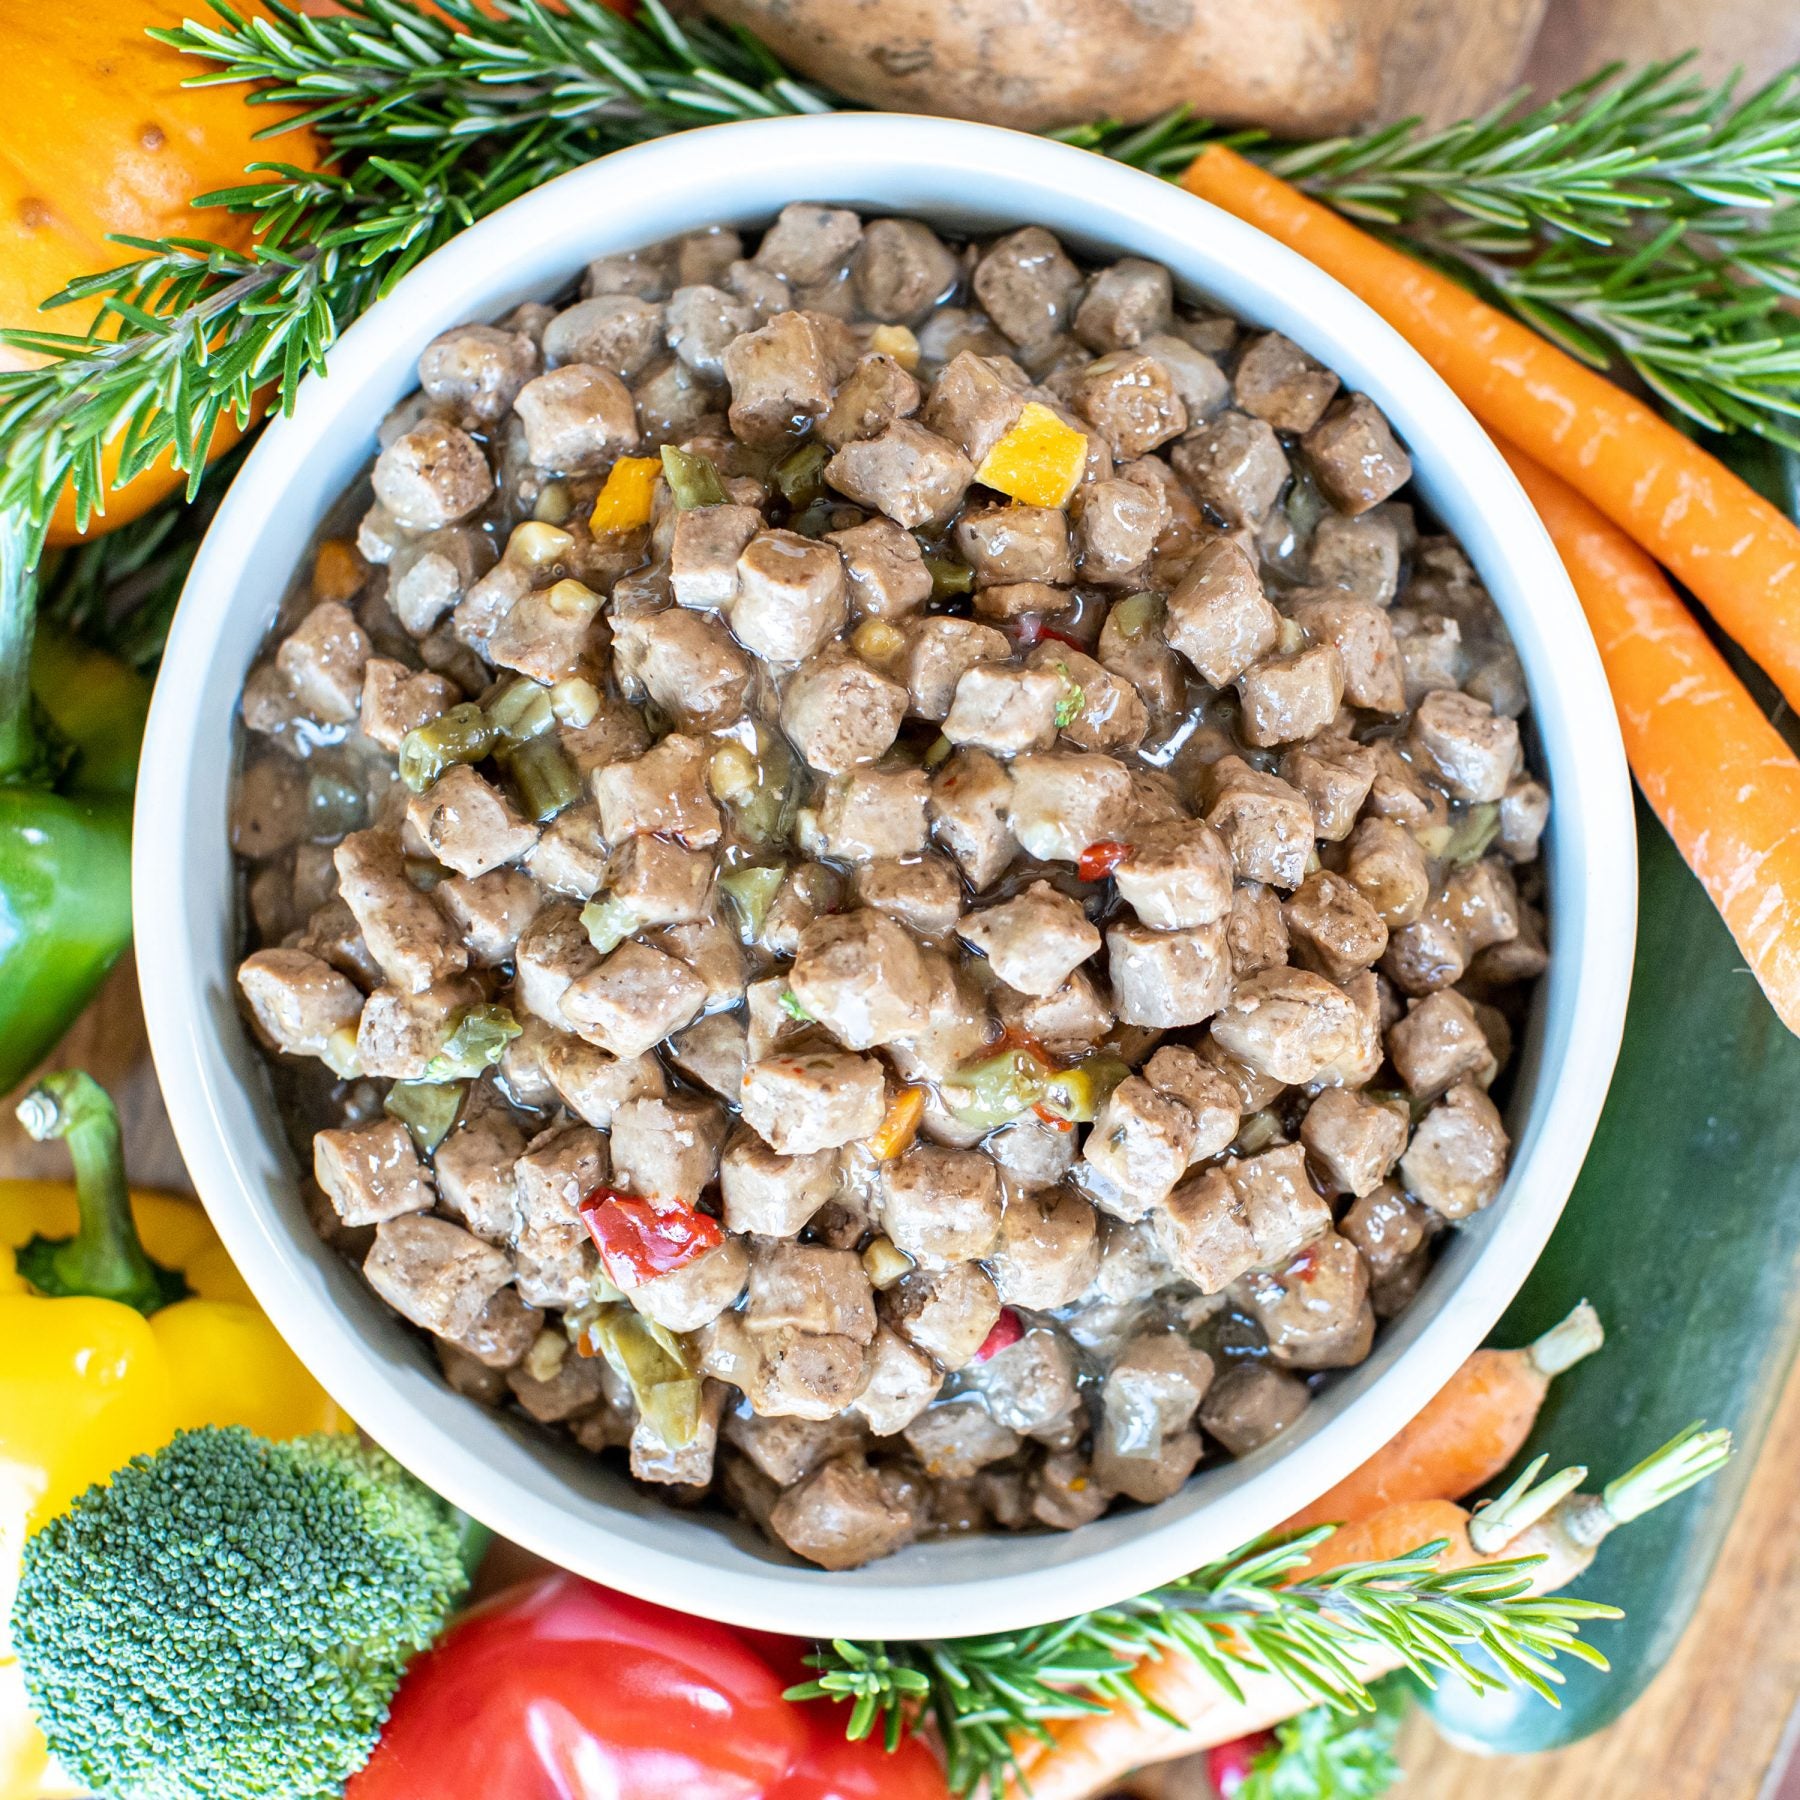 Little BigPaw Turkey with Broccoli, Carrots and Cranberries in a Rich Herb Gravy Wet Dog Food - 390 g - Heads Up For Tails